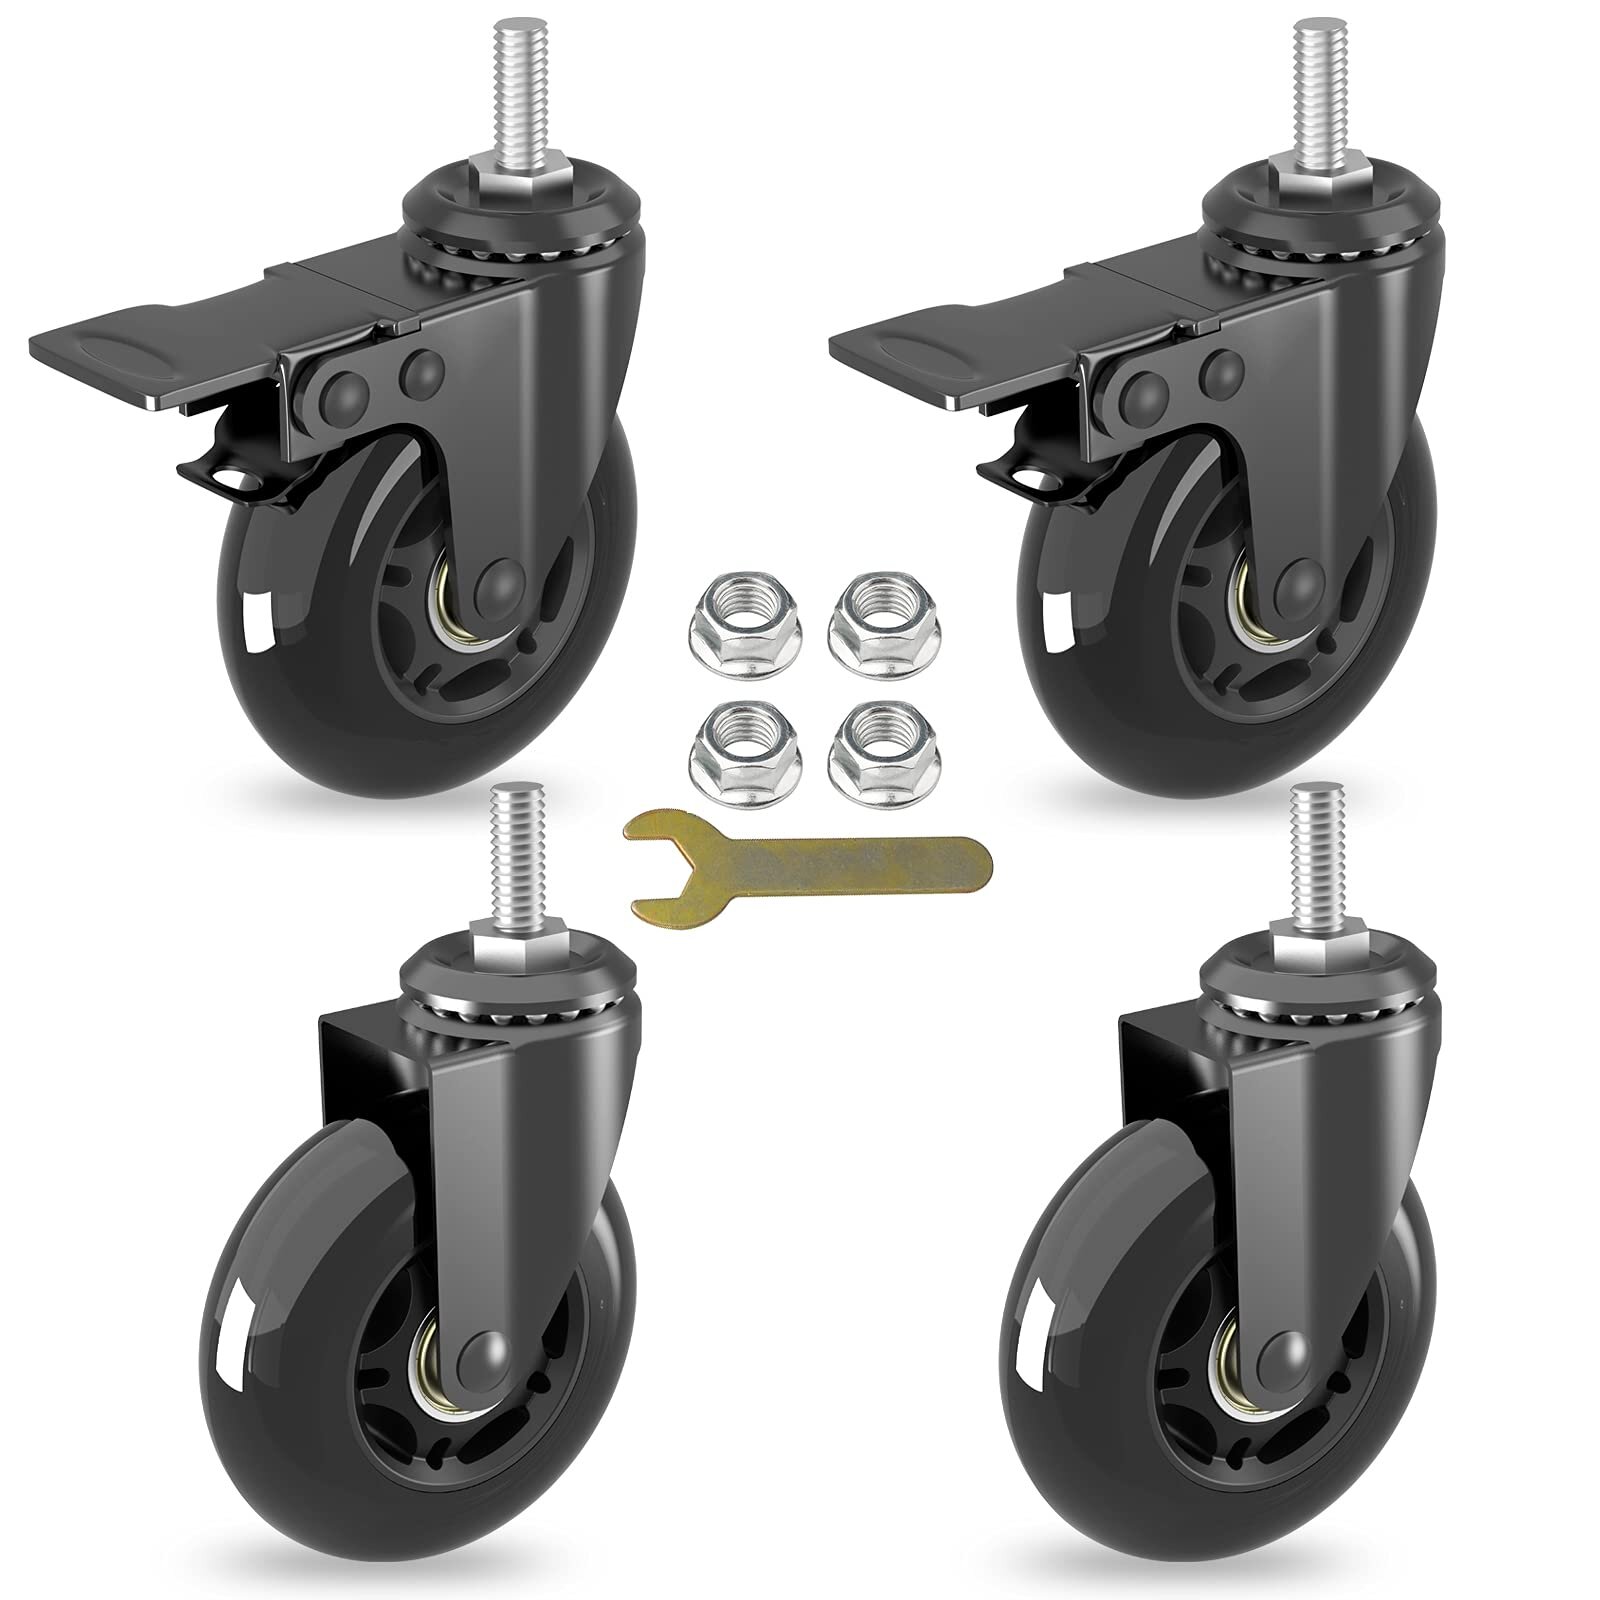 Heavy Duty Plate Casters 360 Degree PVC Swivel Castors Wheels -900 Capacity Set of 4 Safety Locking Brakes Caster Wheels with Screws 3 inch 